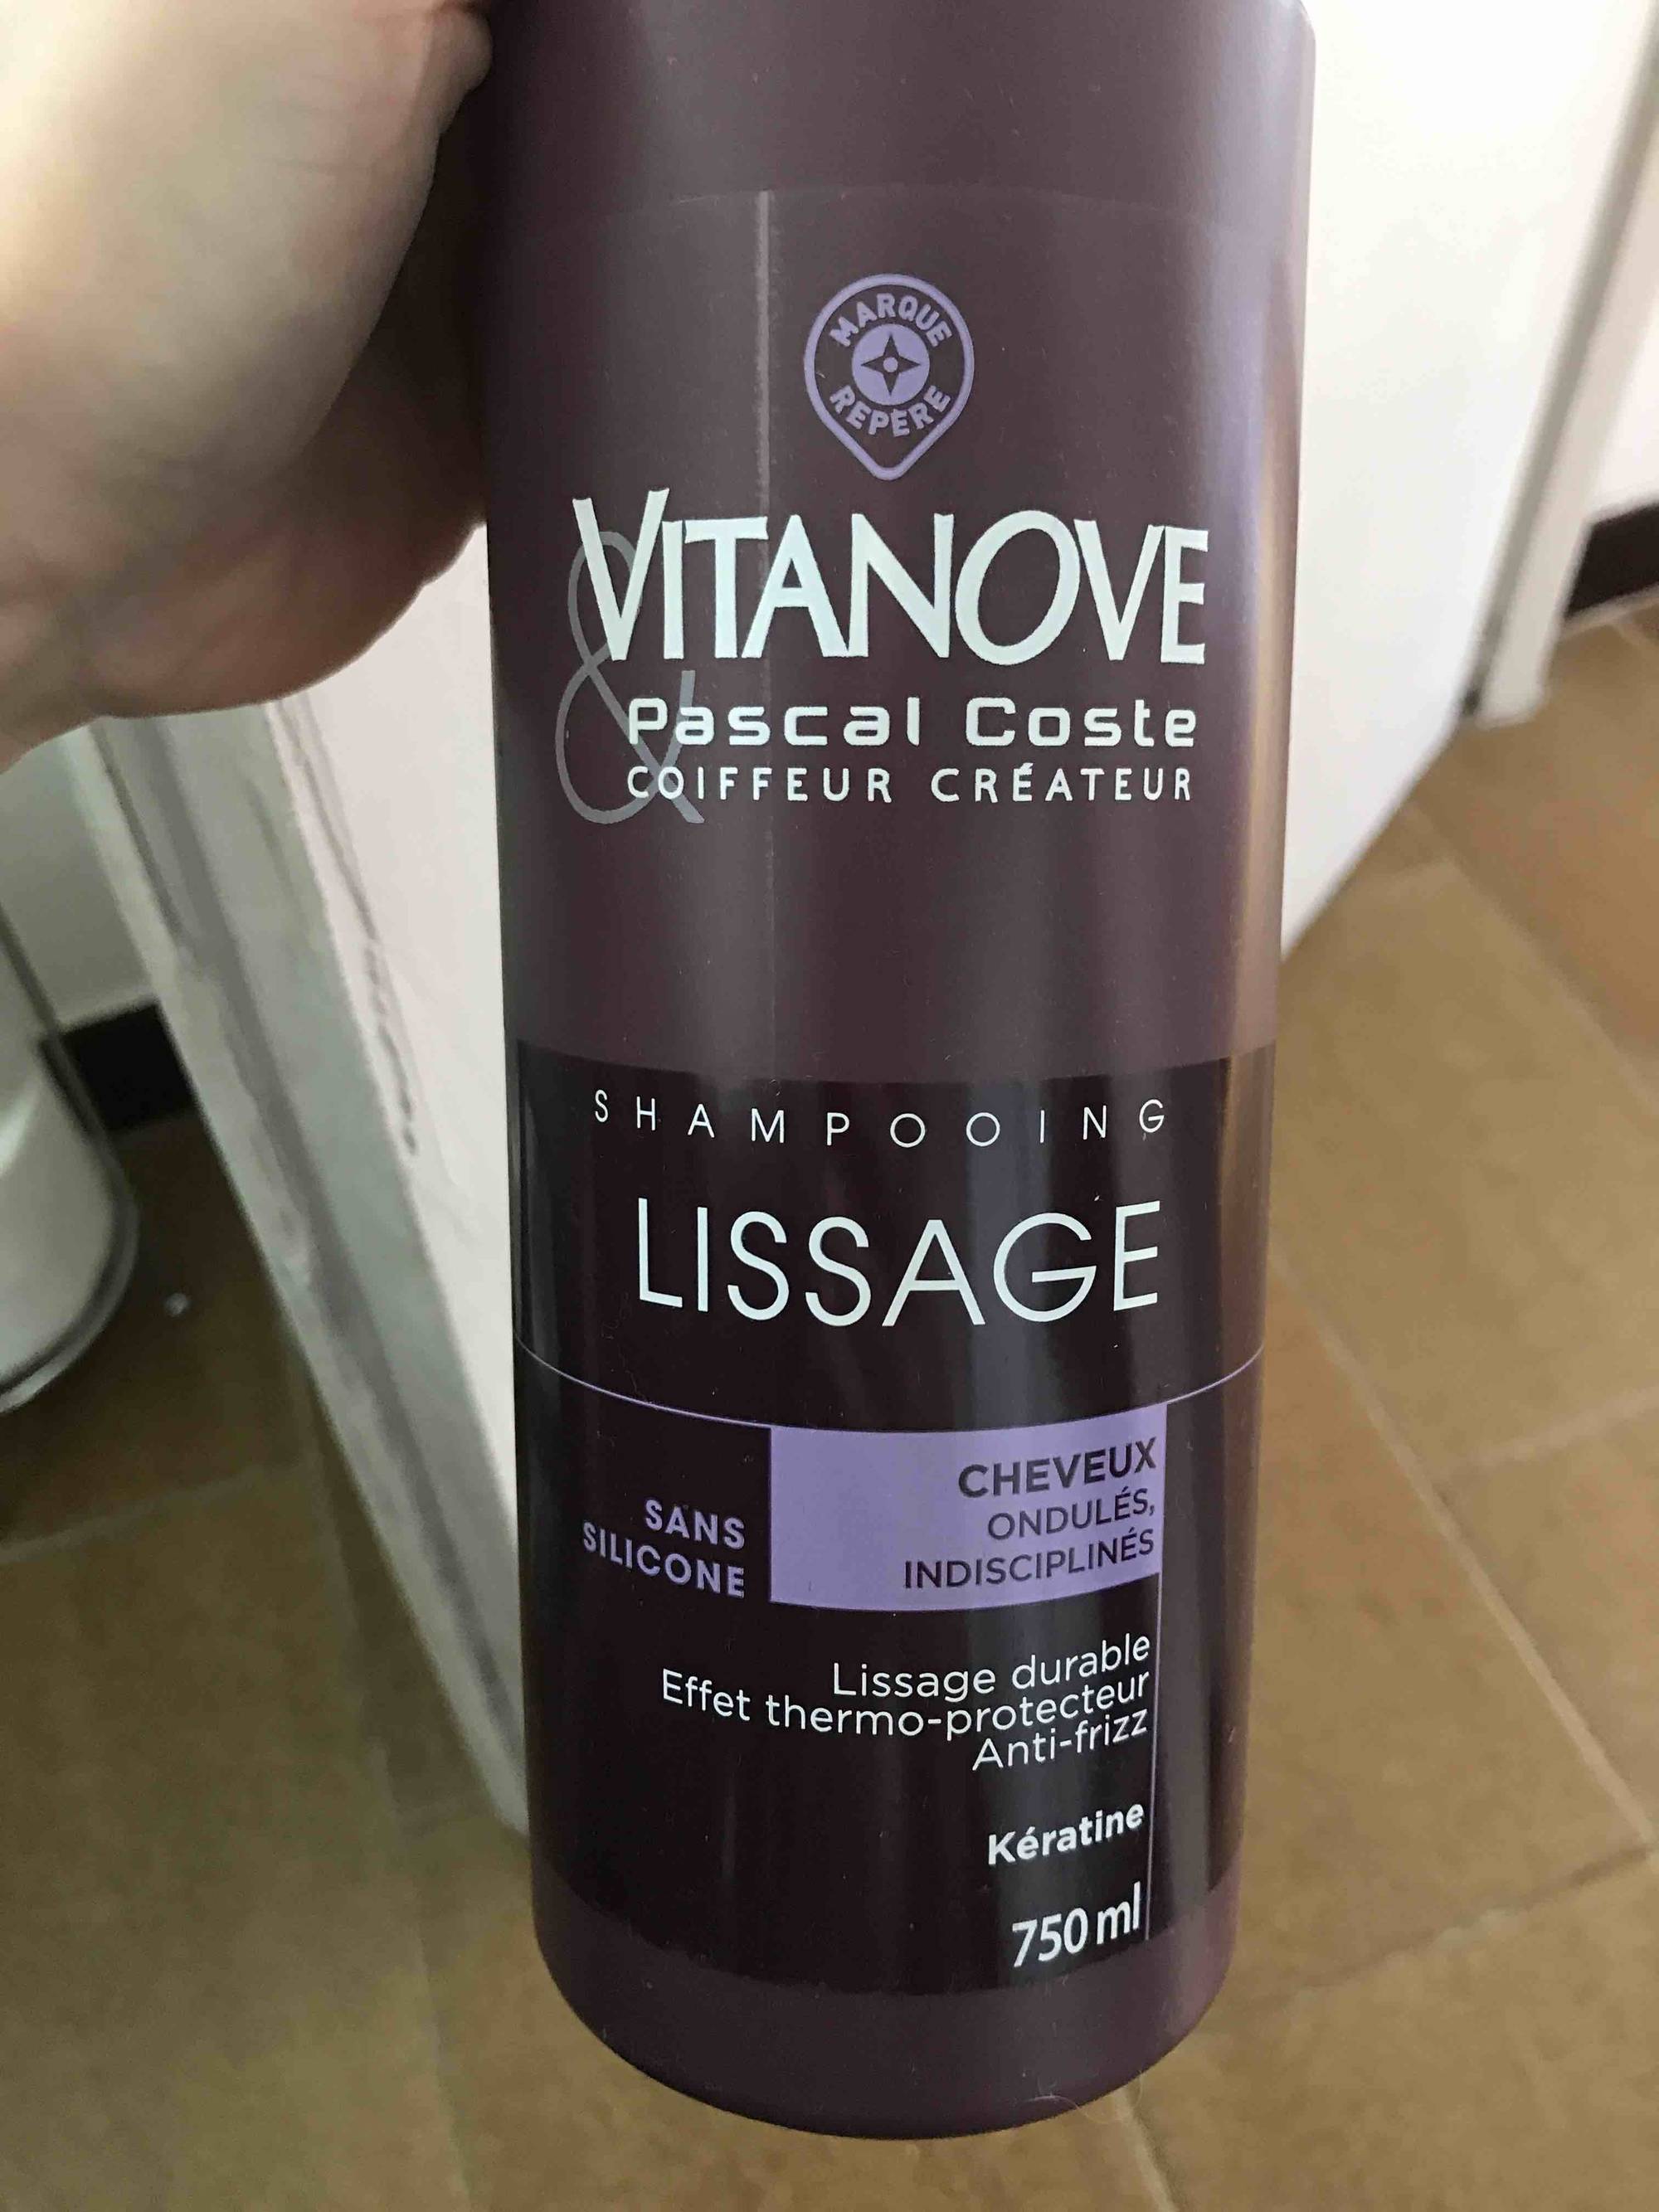 MARQUE REPÈRE - Vitanove pascal coste - Shampooing lissage 